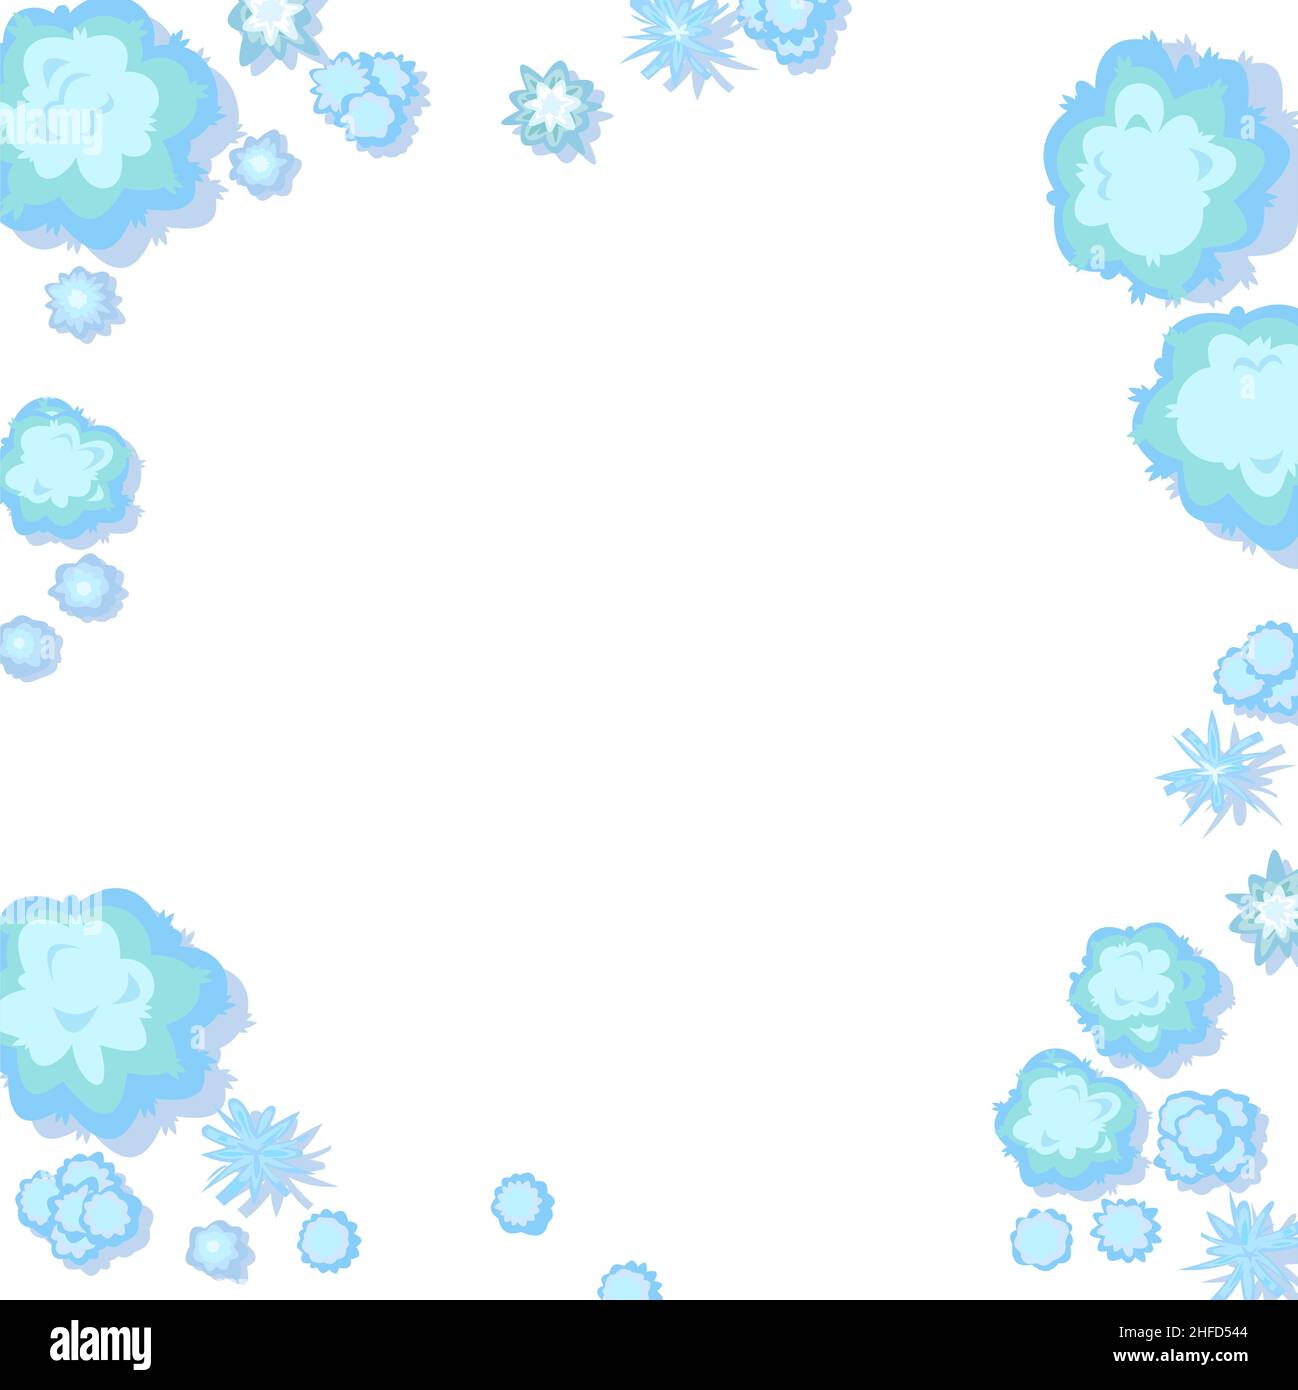 Winter landscape top view. Frame around edge of Square image. Snowy frosty nature in cold season. From high. Drifts of snow. Illustration in cartoon s Stock Vector